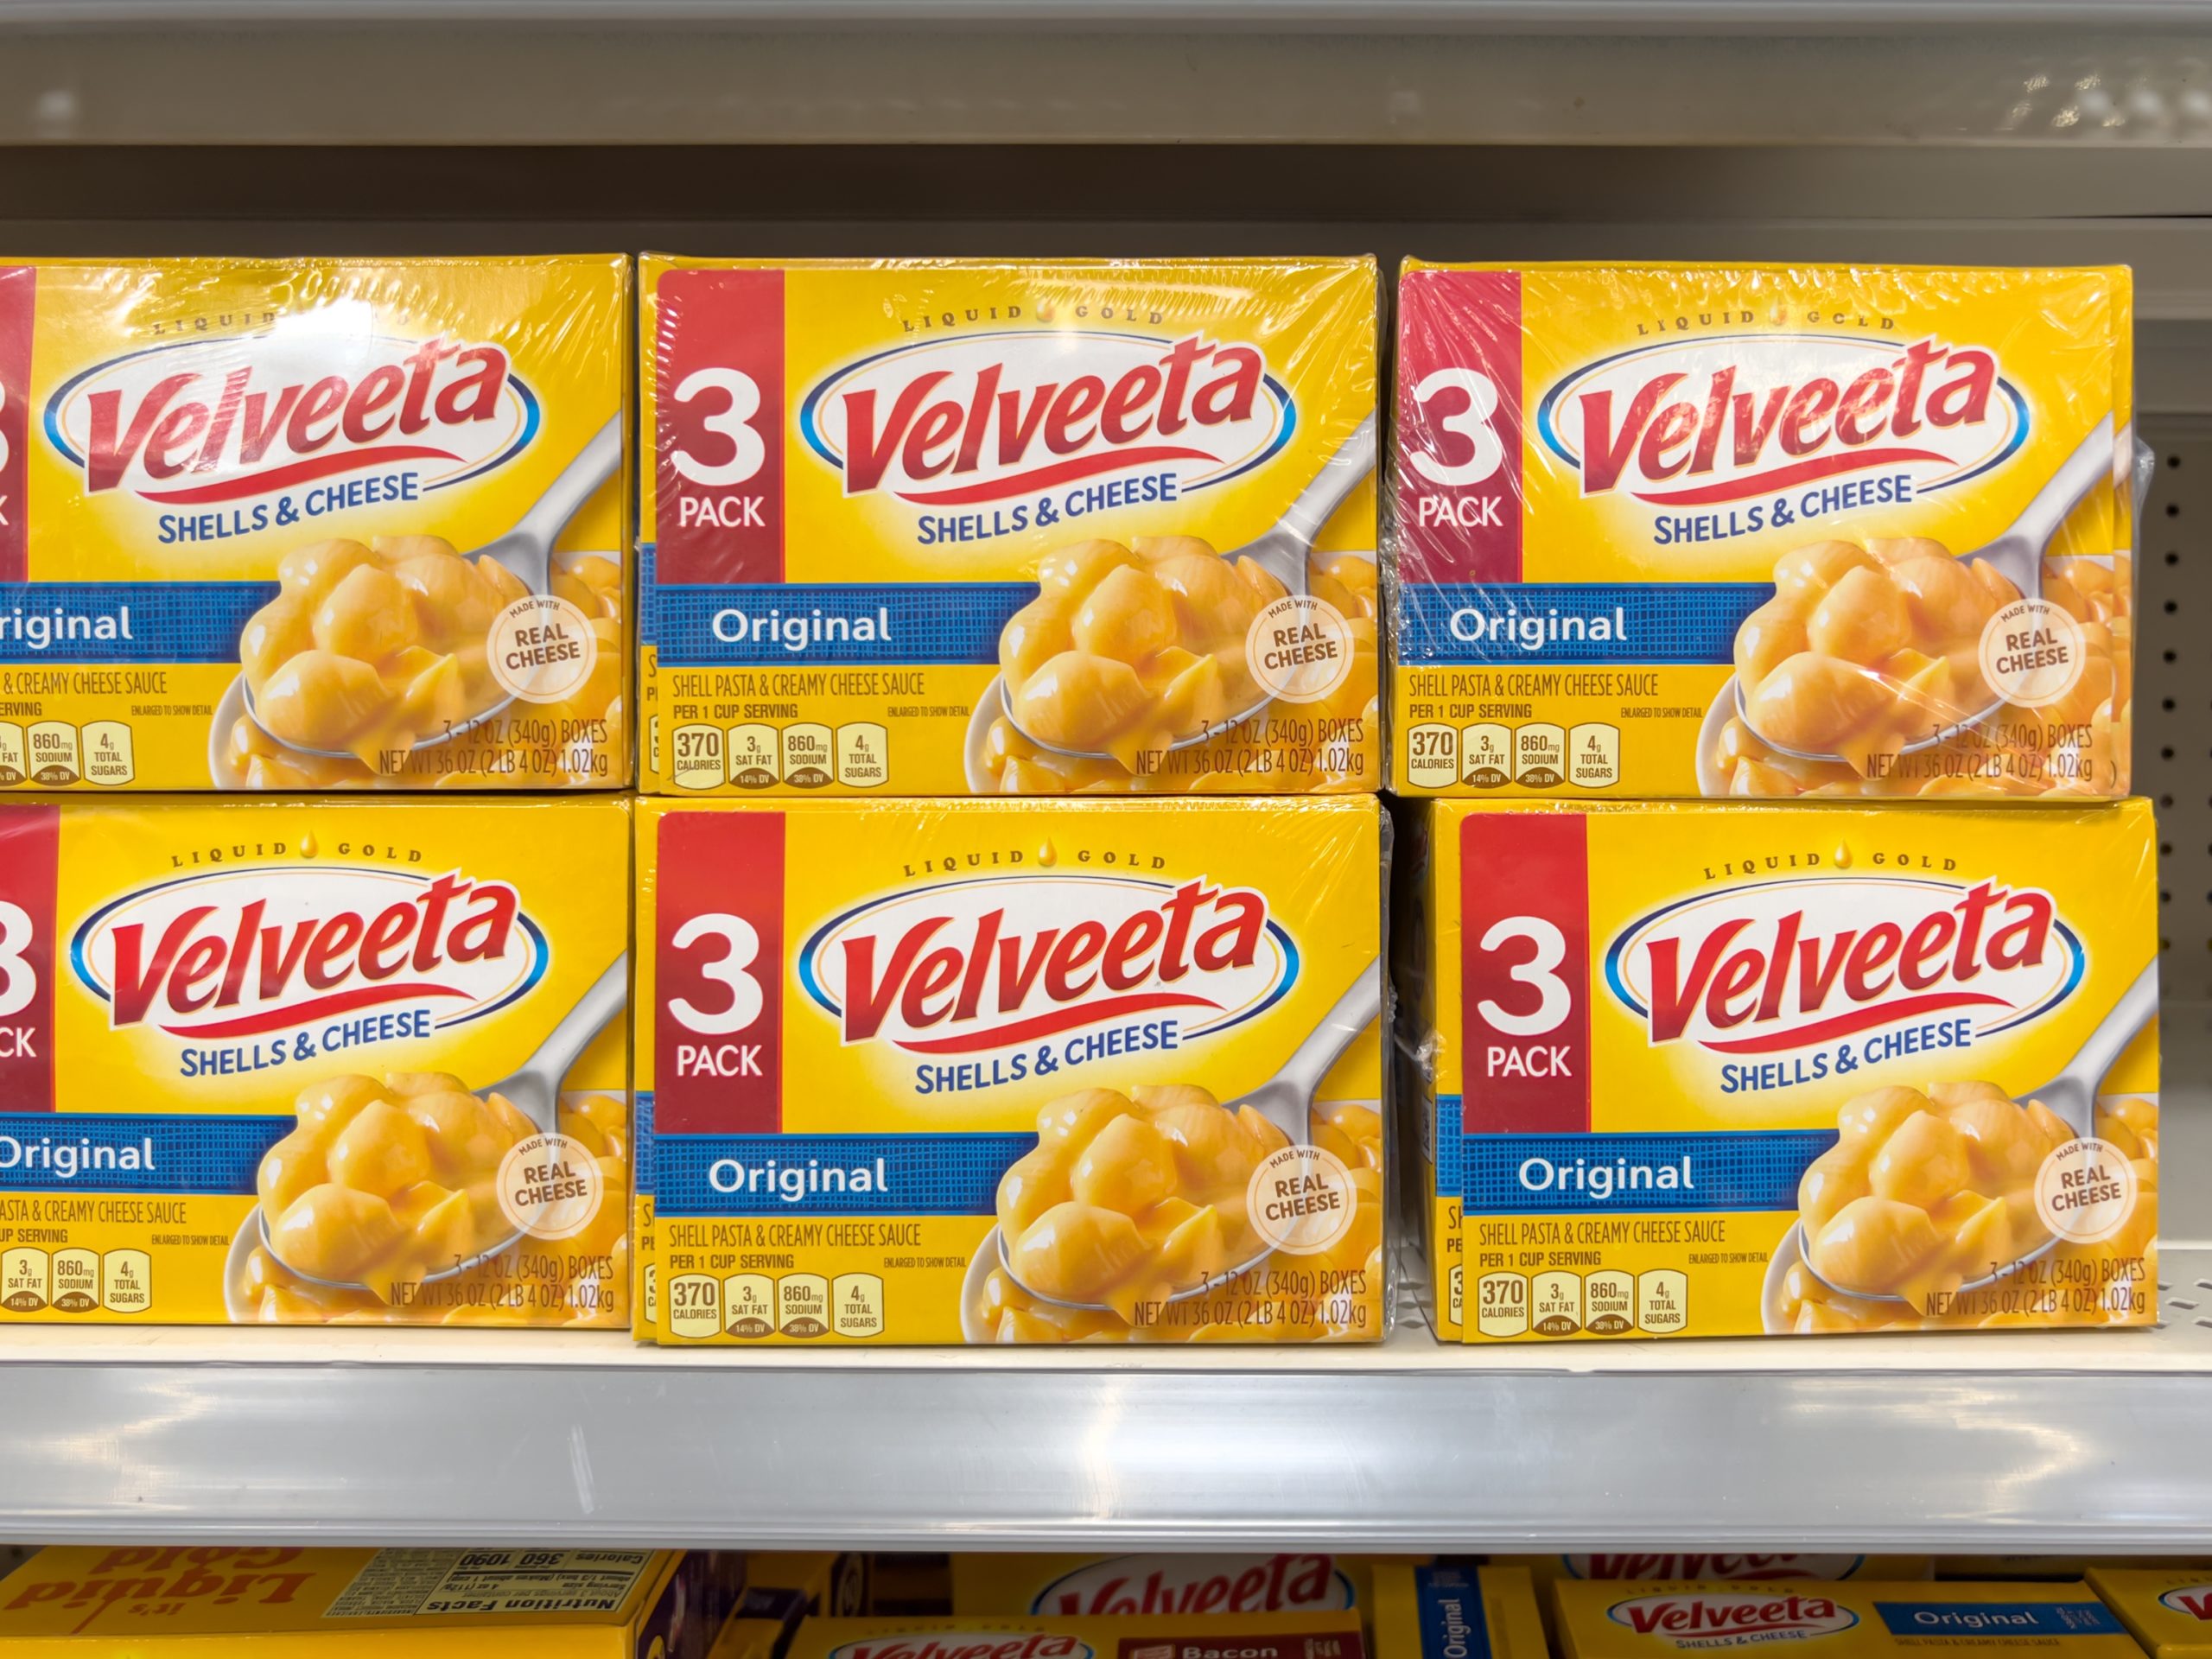 Velveeta Shells and Cheese Original Shell Pasta and Cheese Sauce Meal 3 ct Pack, 12 oz Boxes on the shelf in a grocery store.